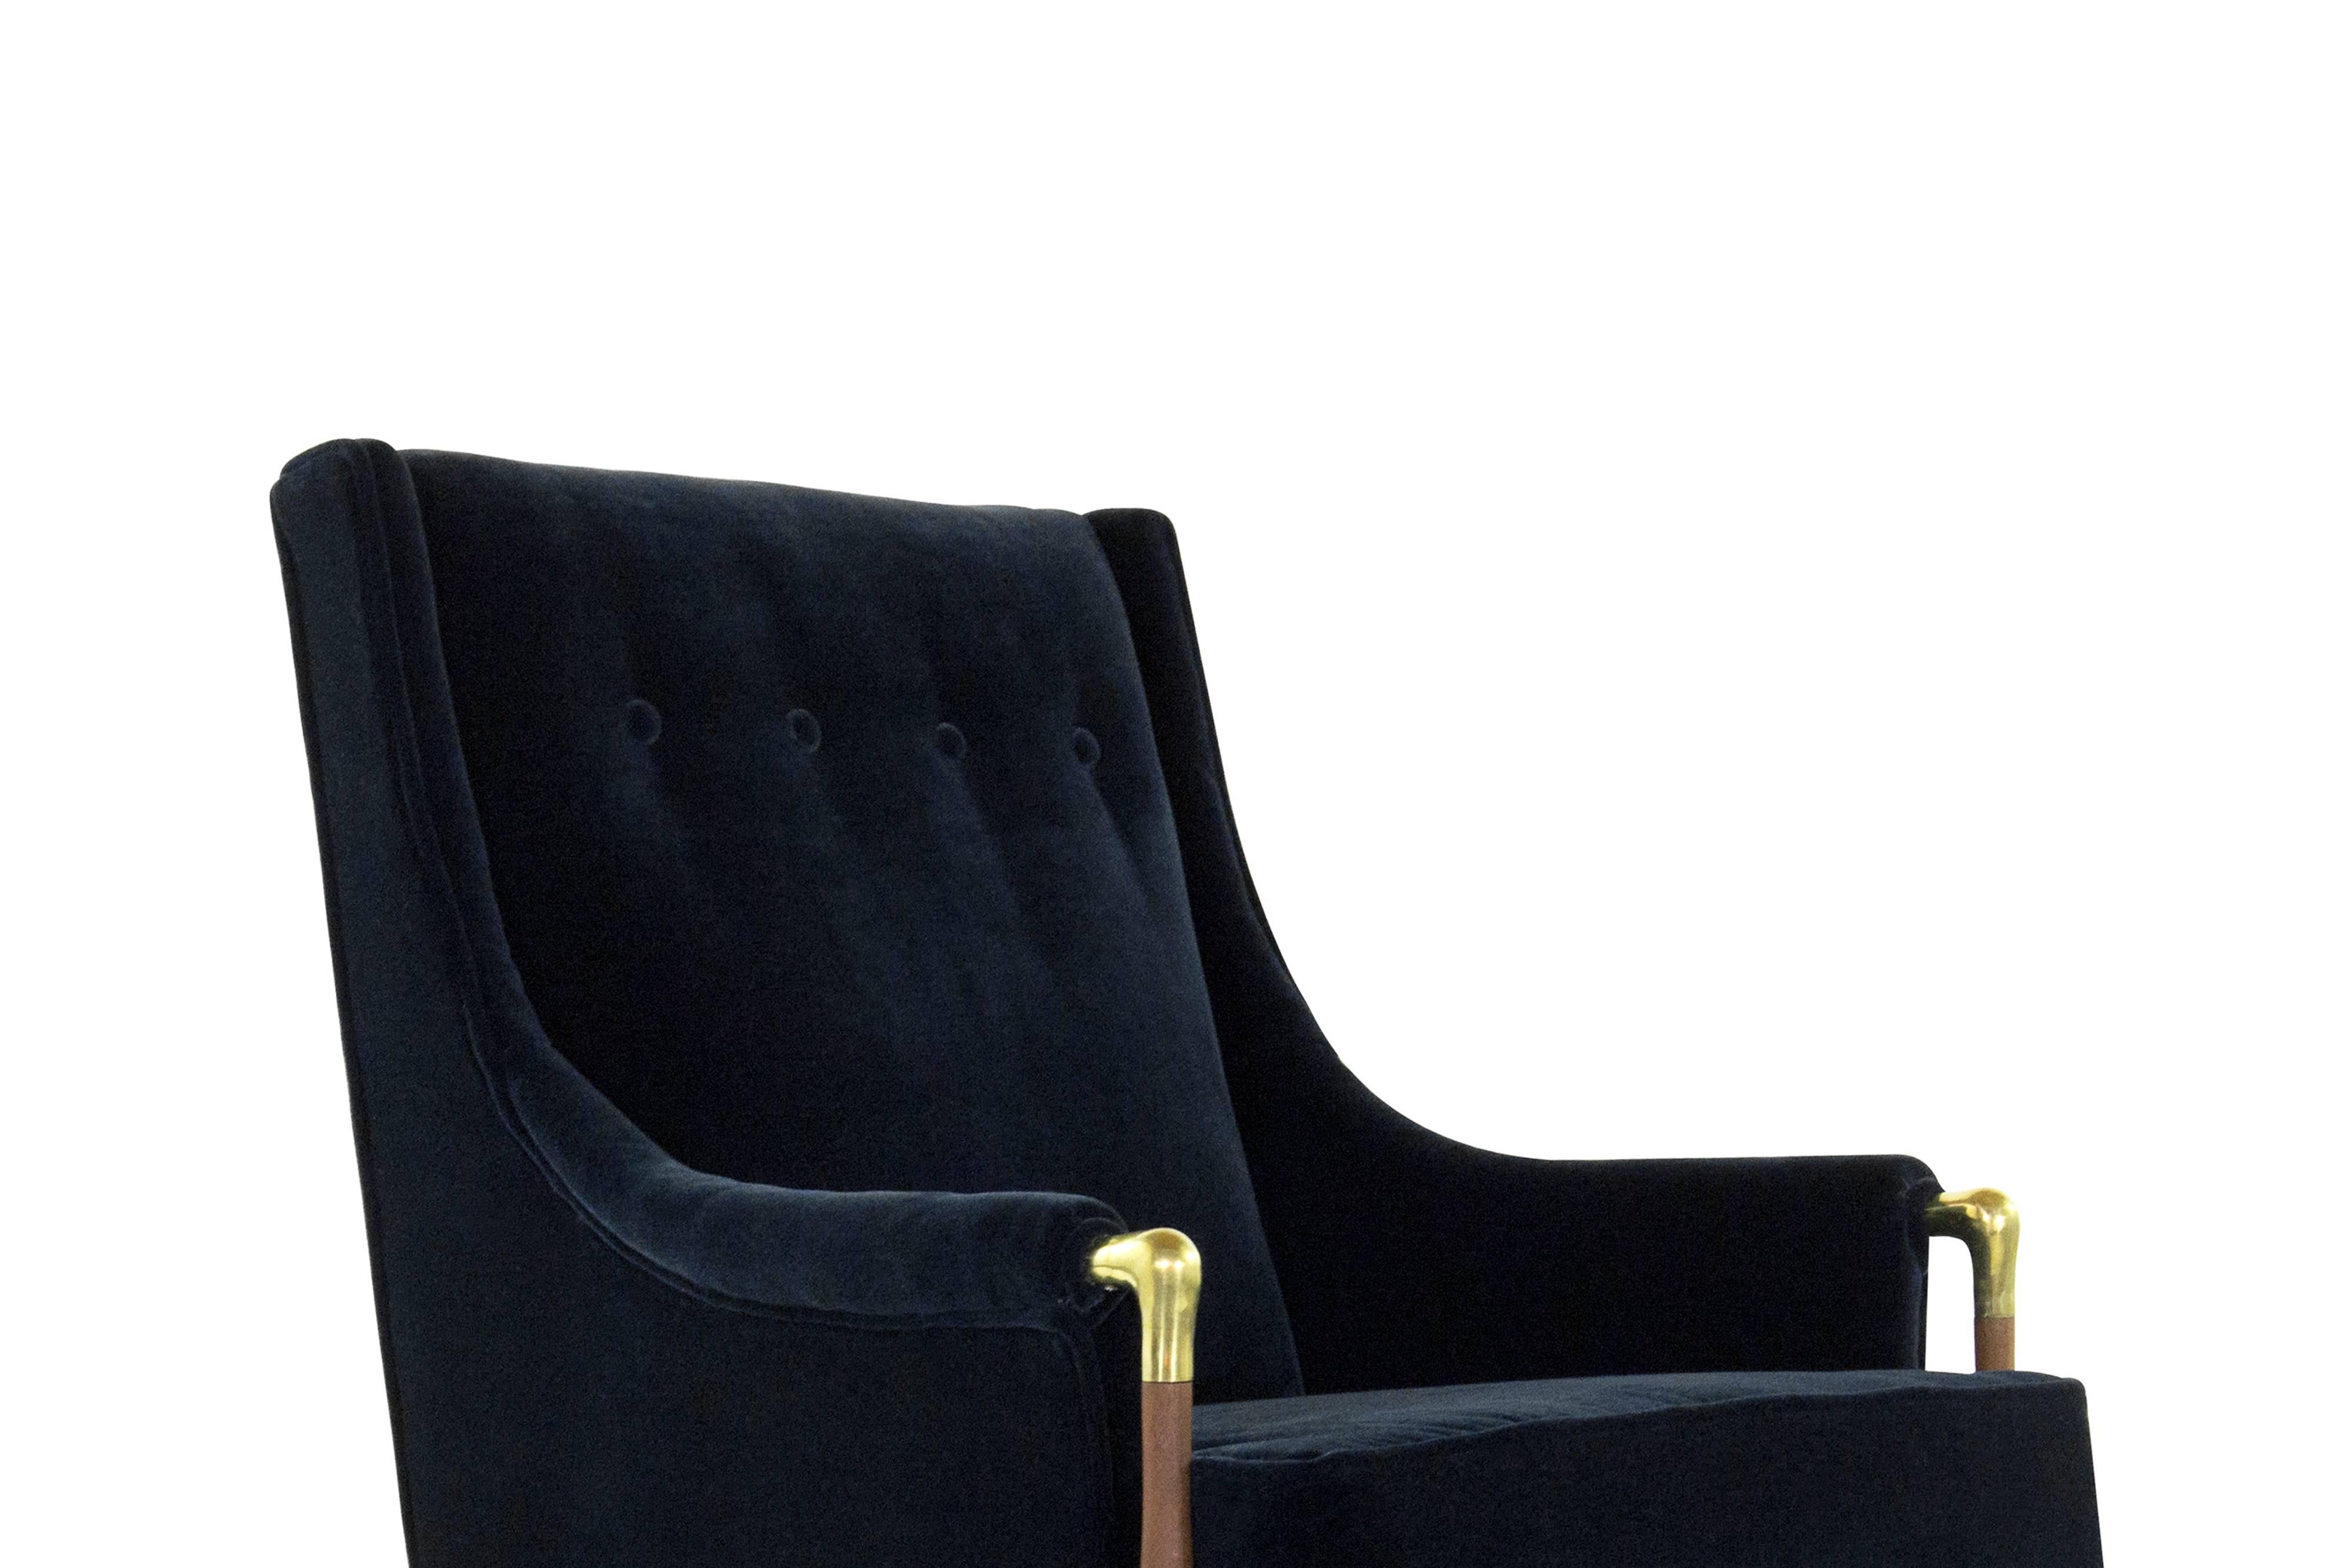 20th Century Sculptural Gio Ponti Style Lounge Chair, 1950s